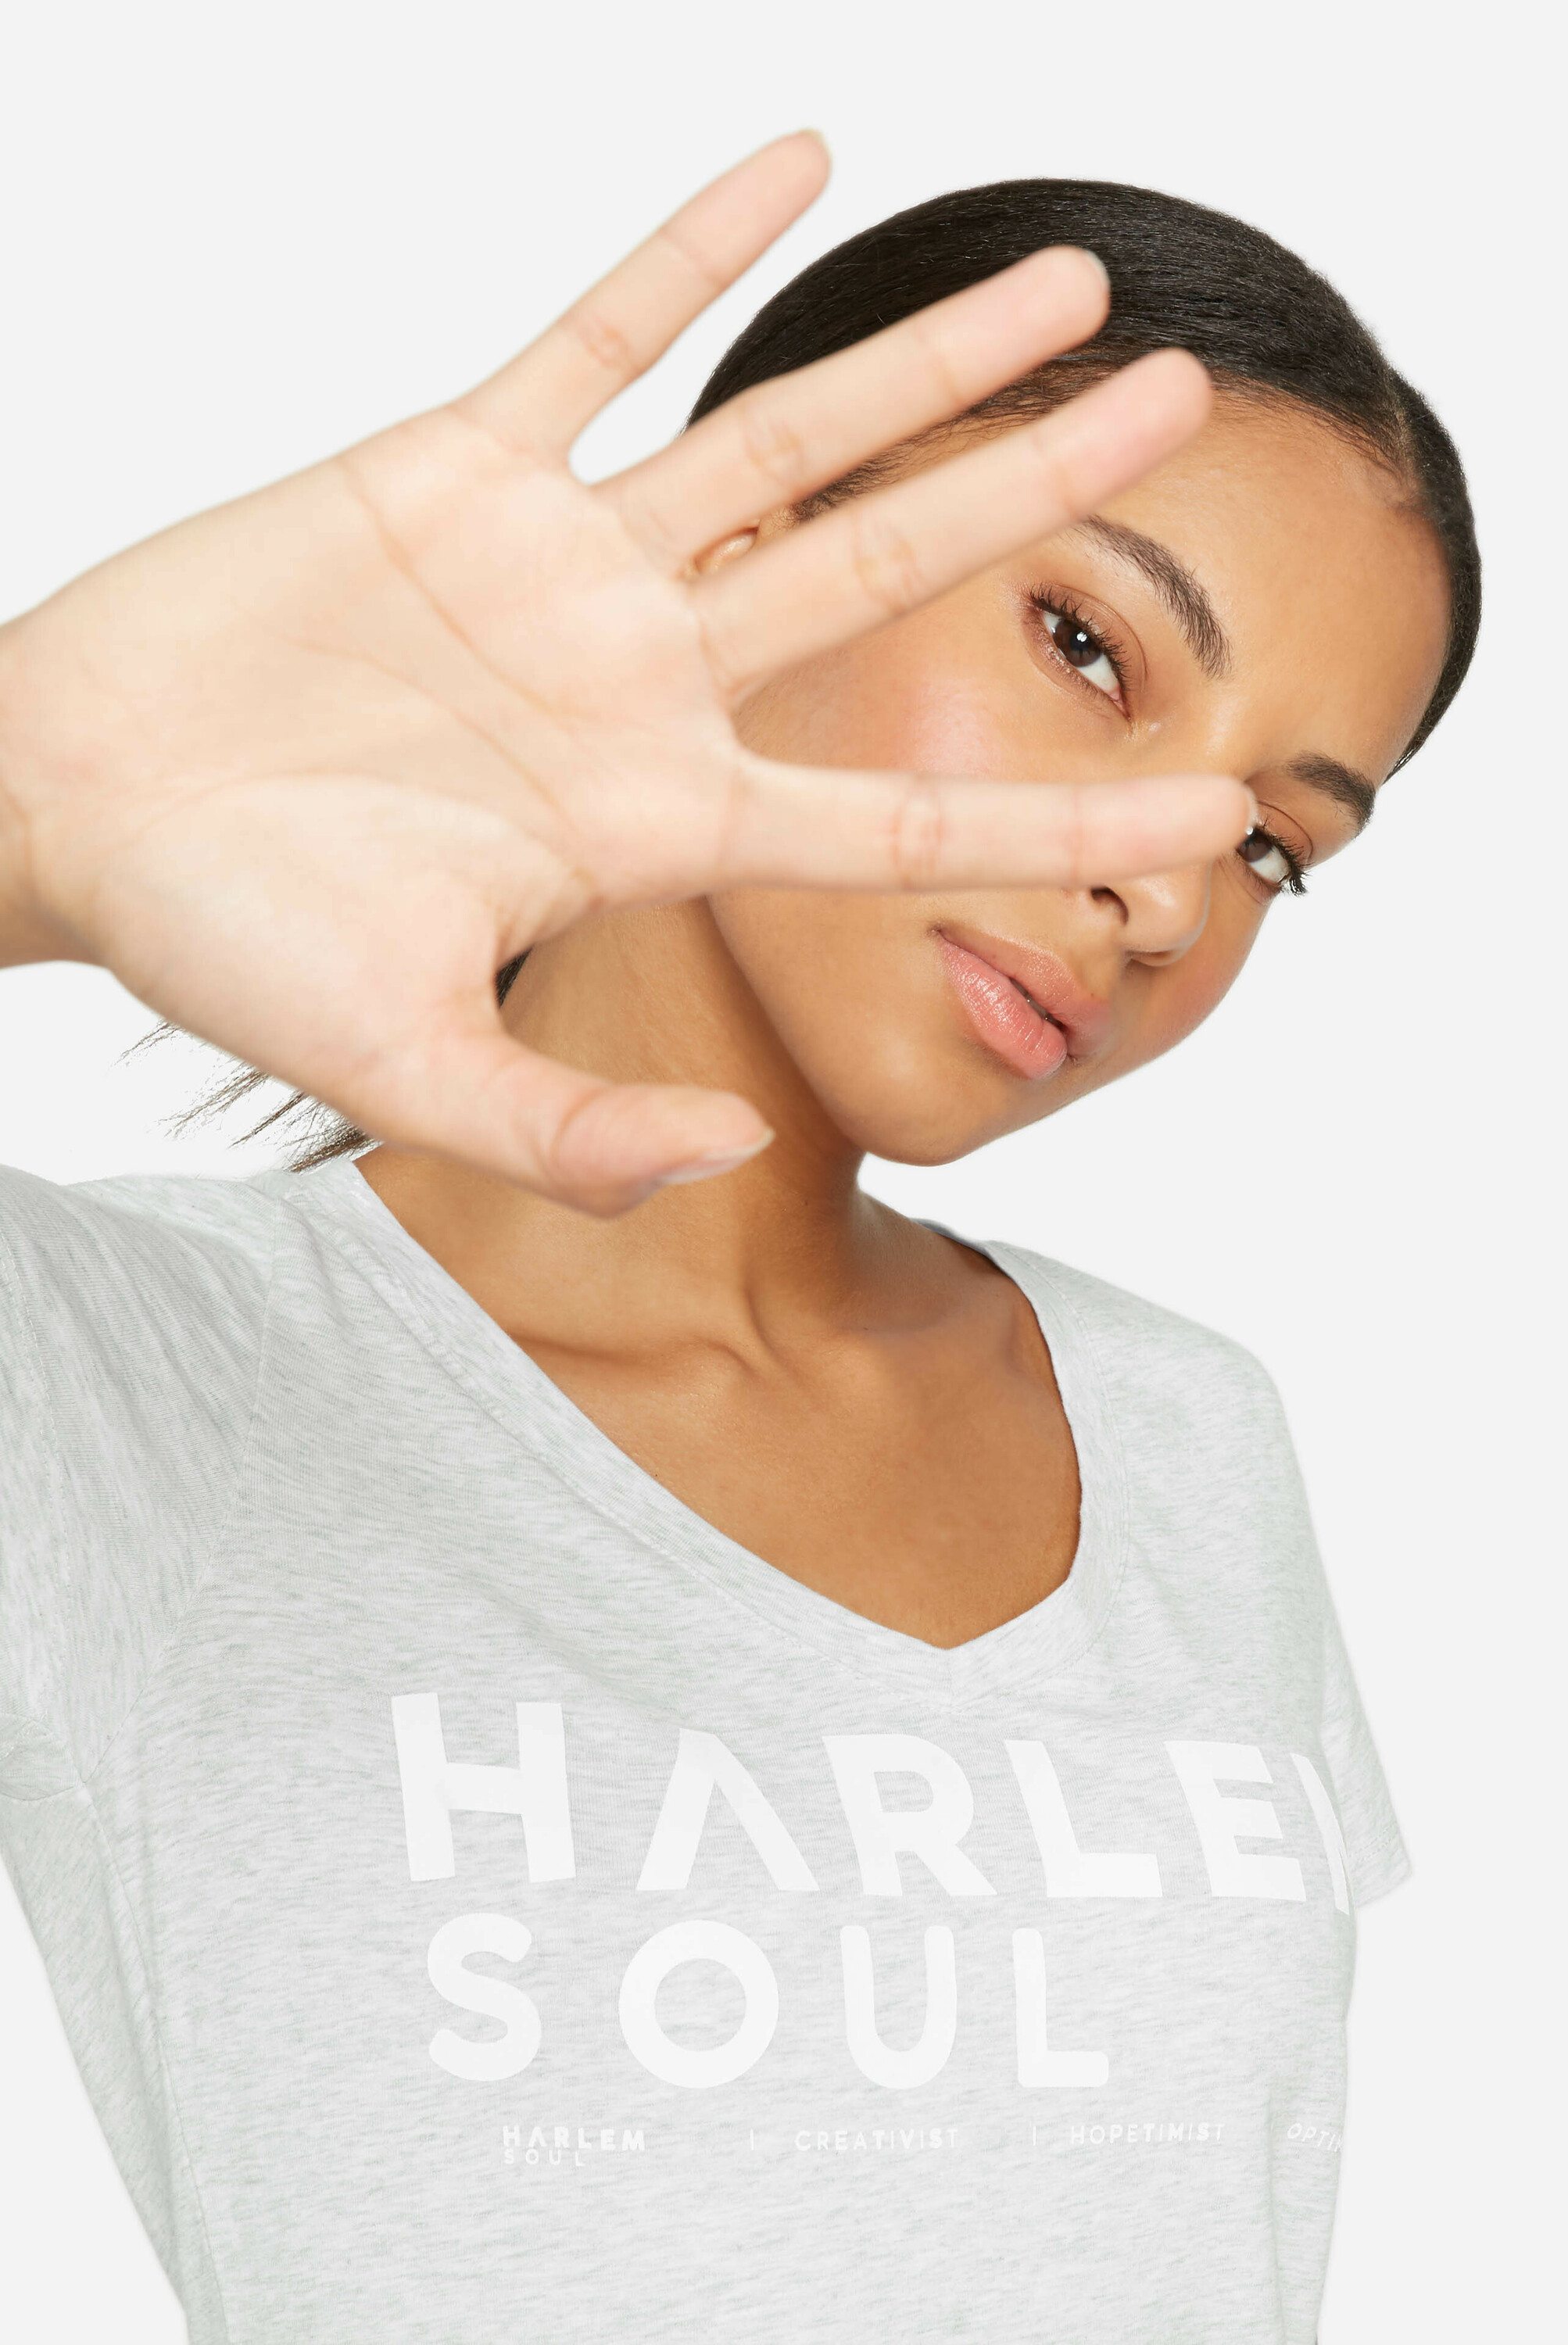 Harlem Soul MARY-LAND T-Shirt in Weiß 